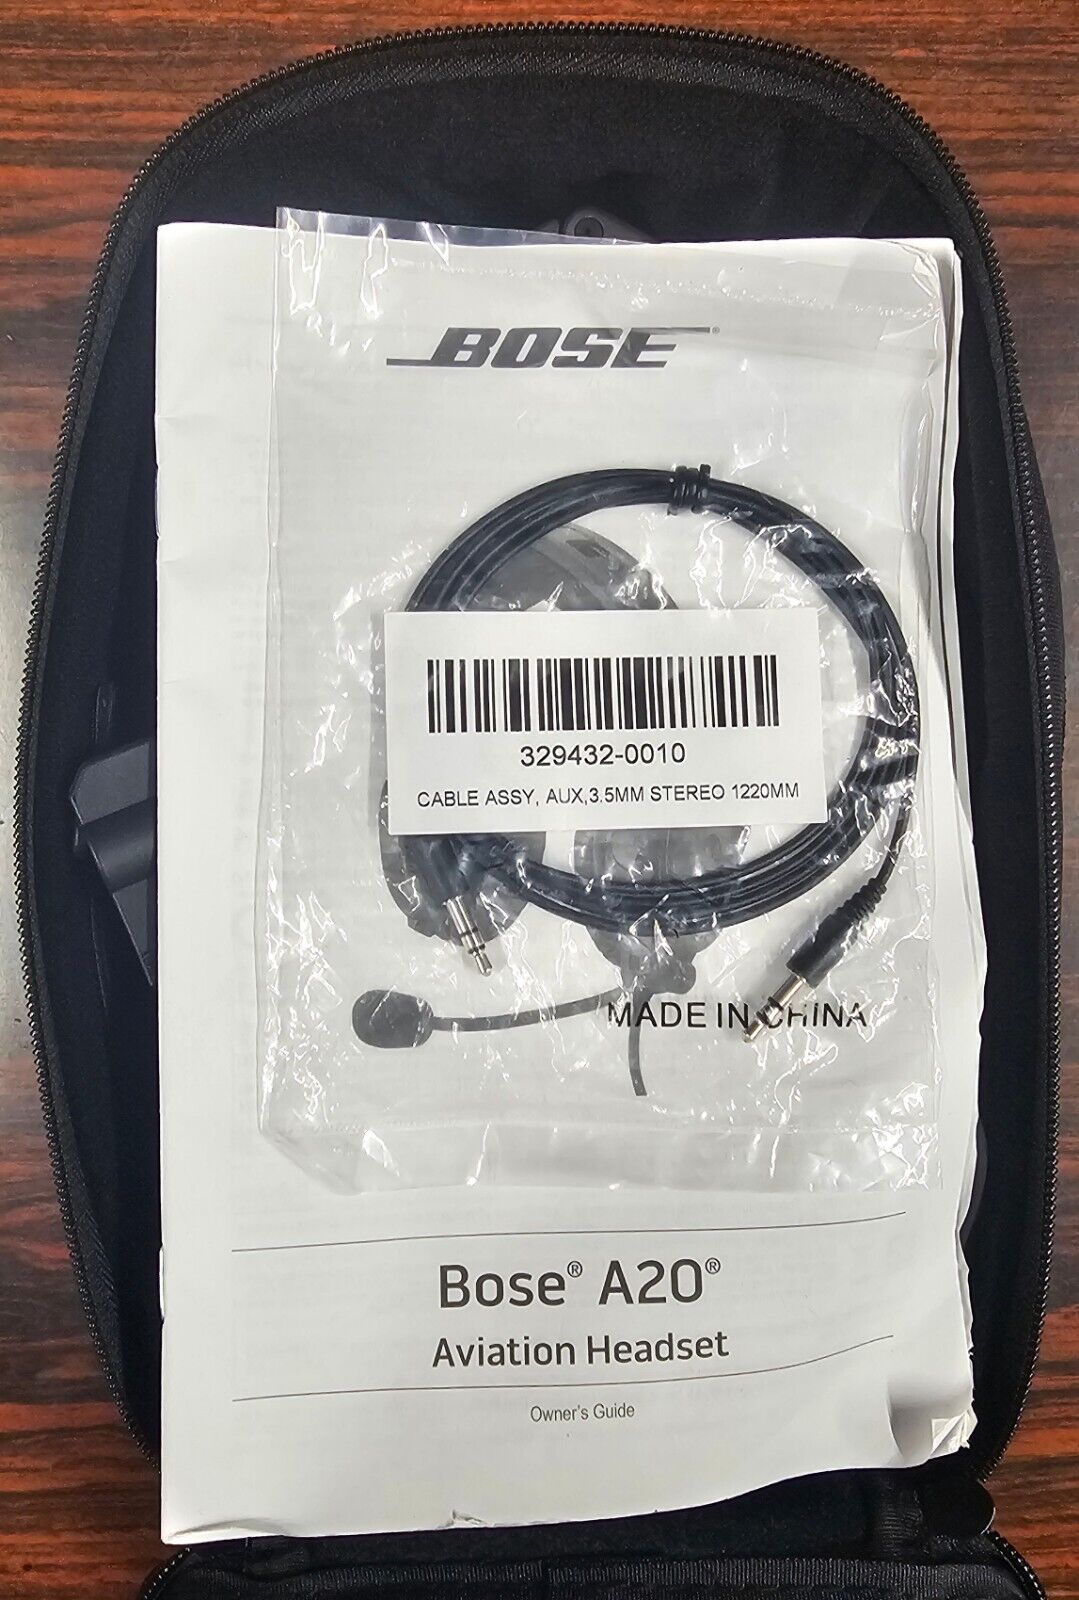 Bose A20 Aviation Headset with Bluetooth and Dual Plug Cable - Black